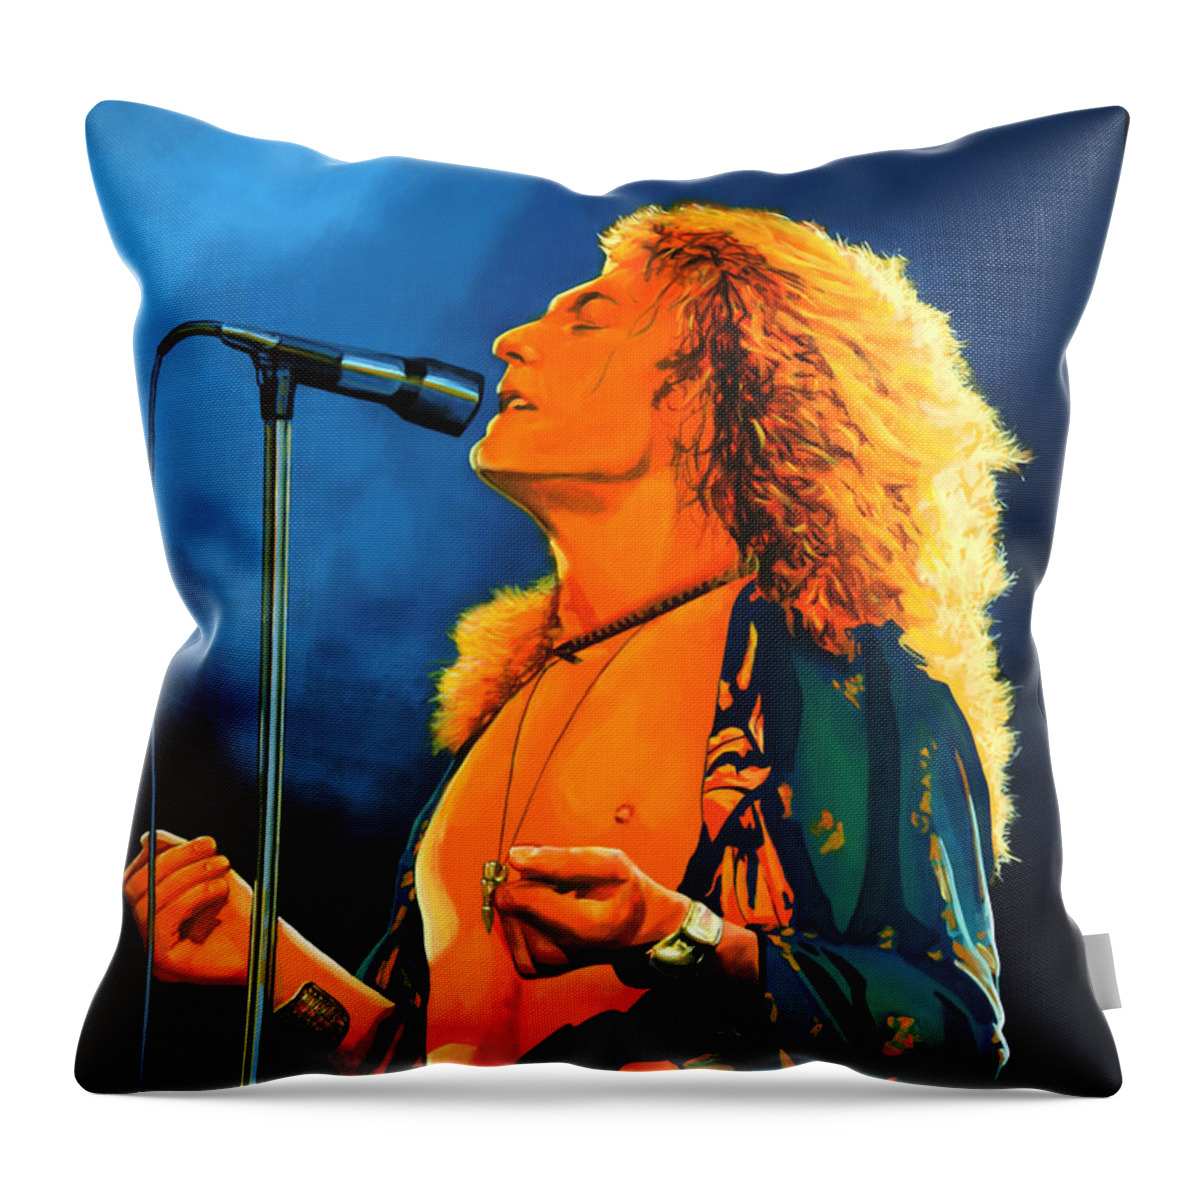 Robert Plant Throw Pillow featuring the painting Robert Plant by Paul Meijering